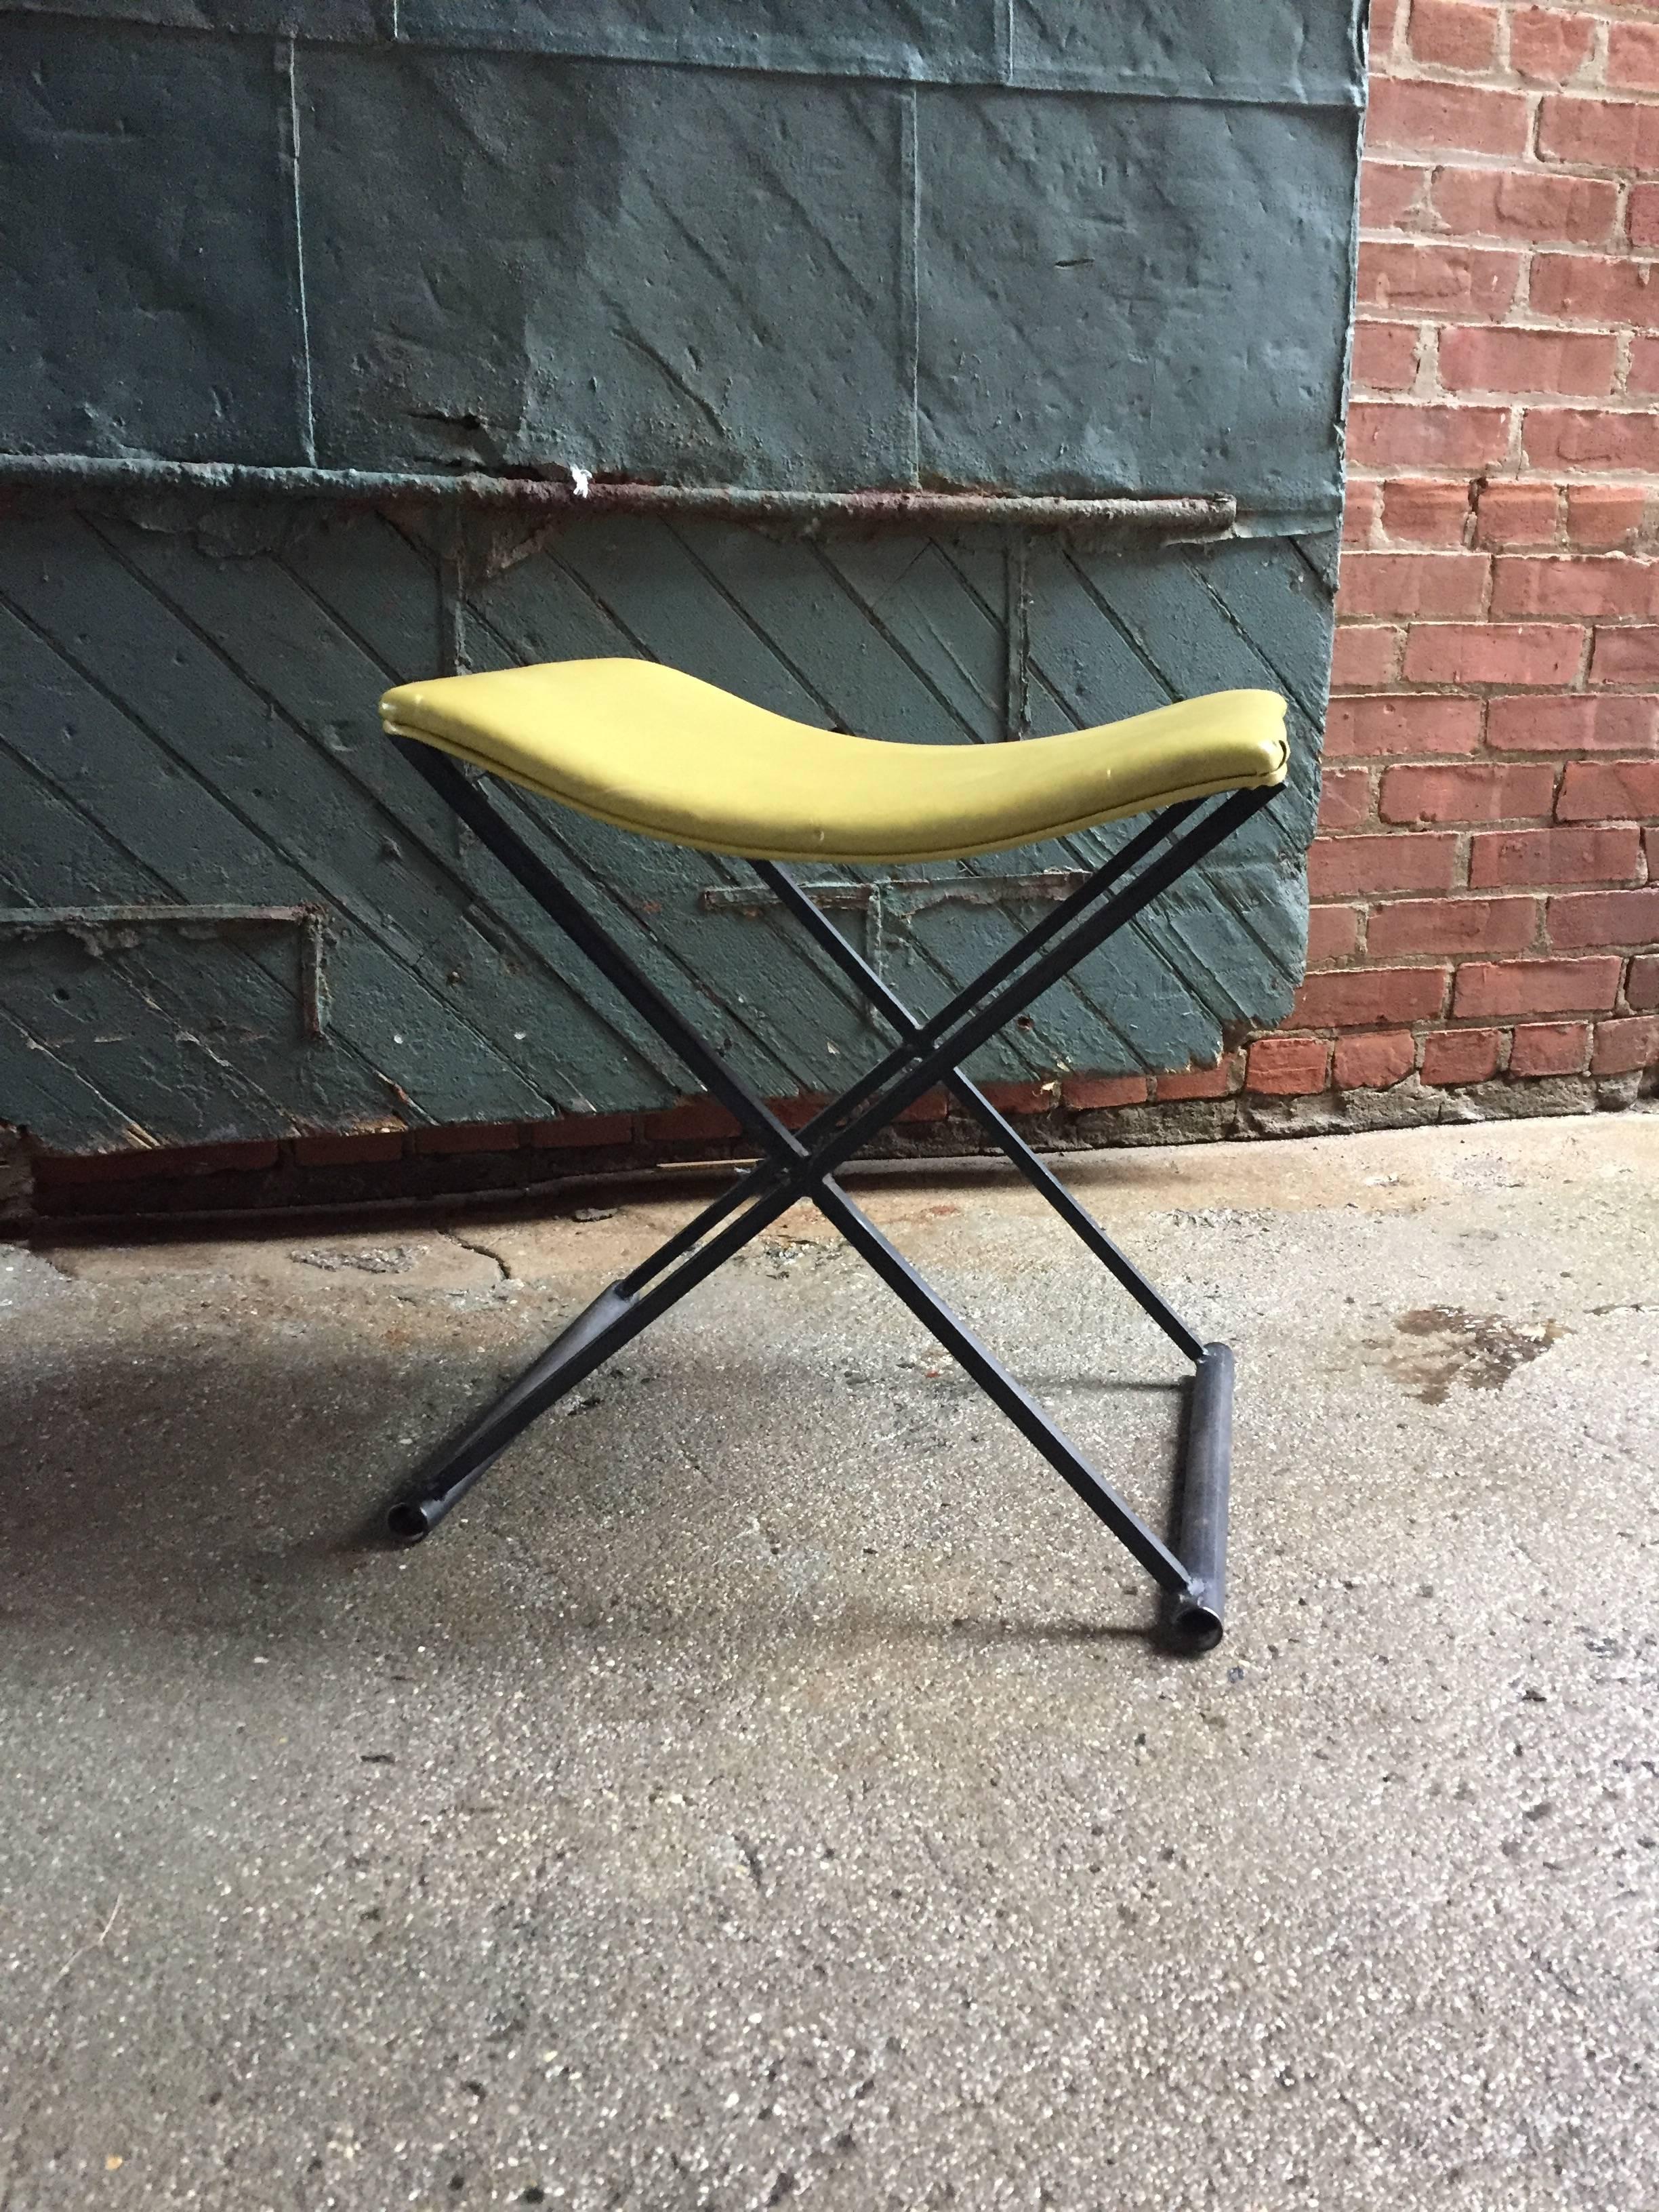 Original yellow vinyl concave seat resting on a black lacquered X-base steel frame. Great accent piece.